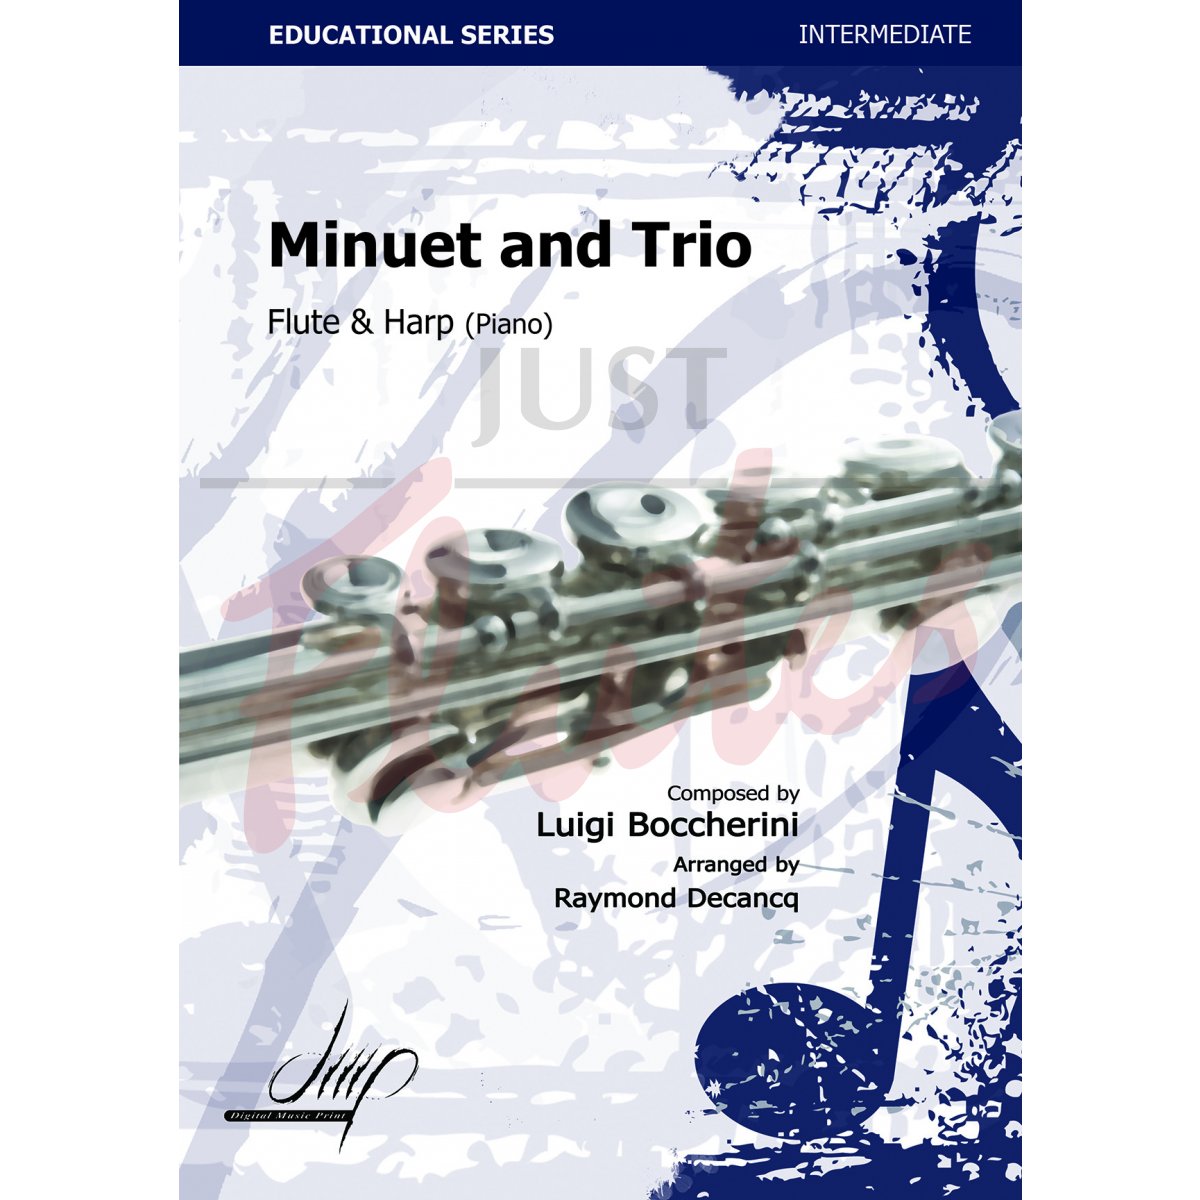 Minuet and Trio (from Quintet in E Op. 13 No. 5) for Flute and Harp/Piano